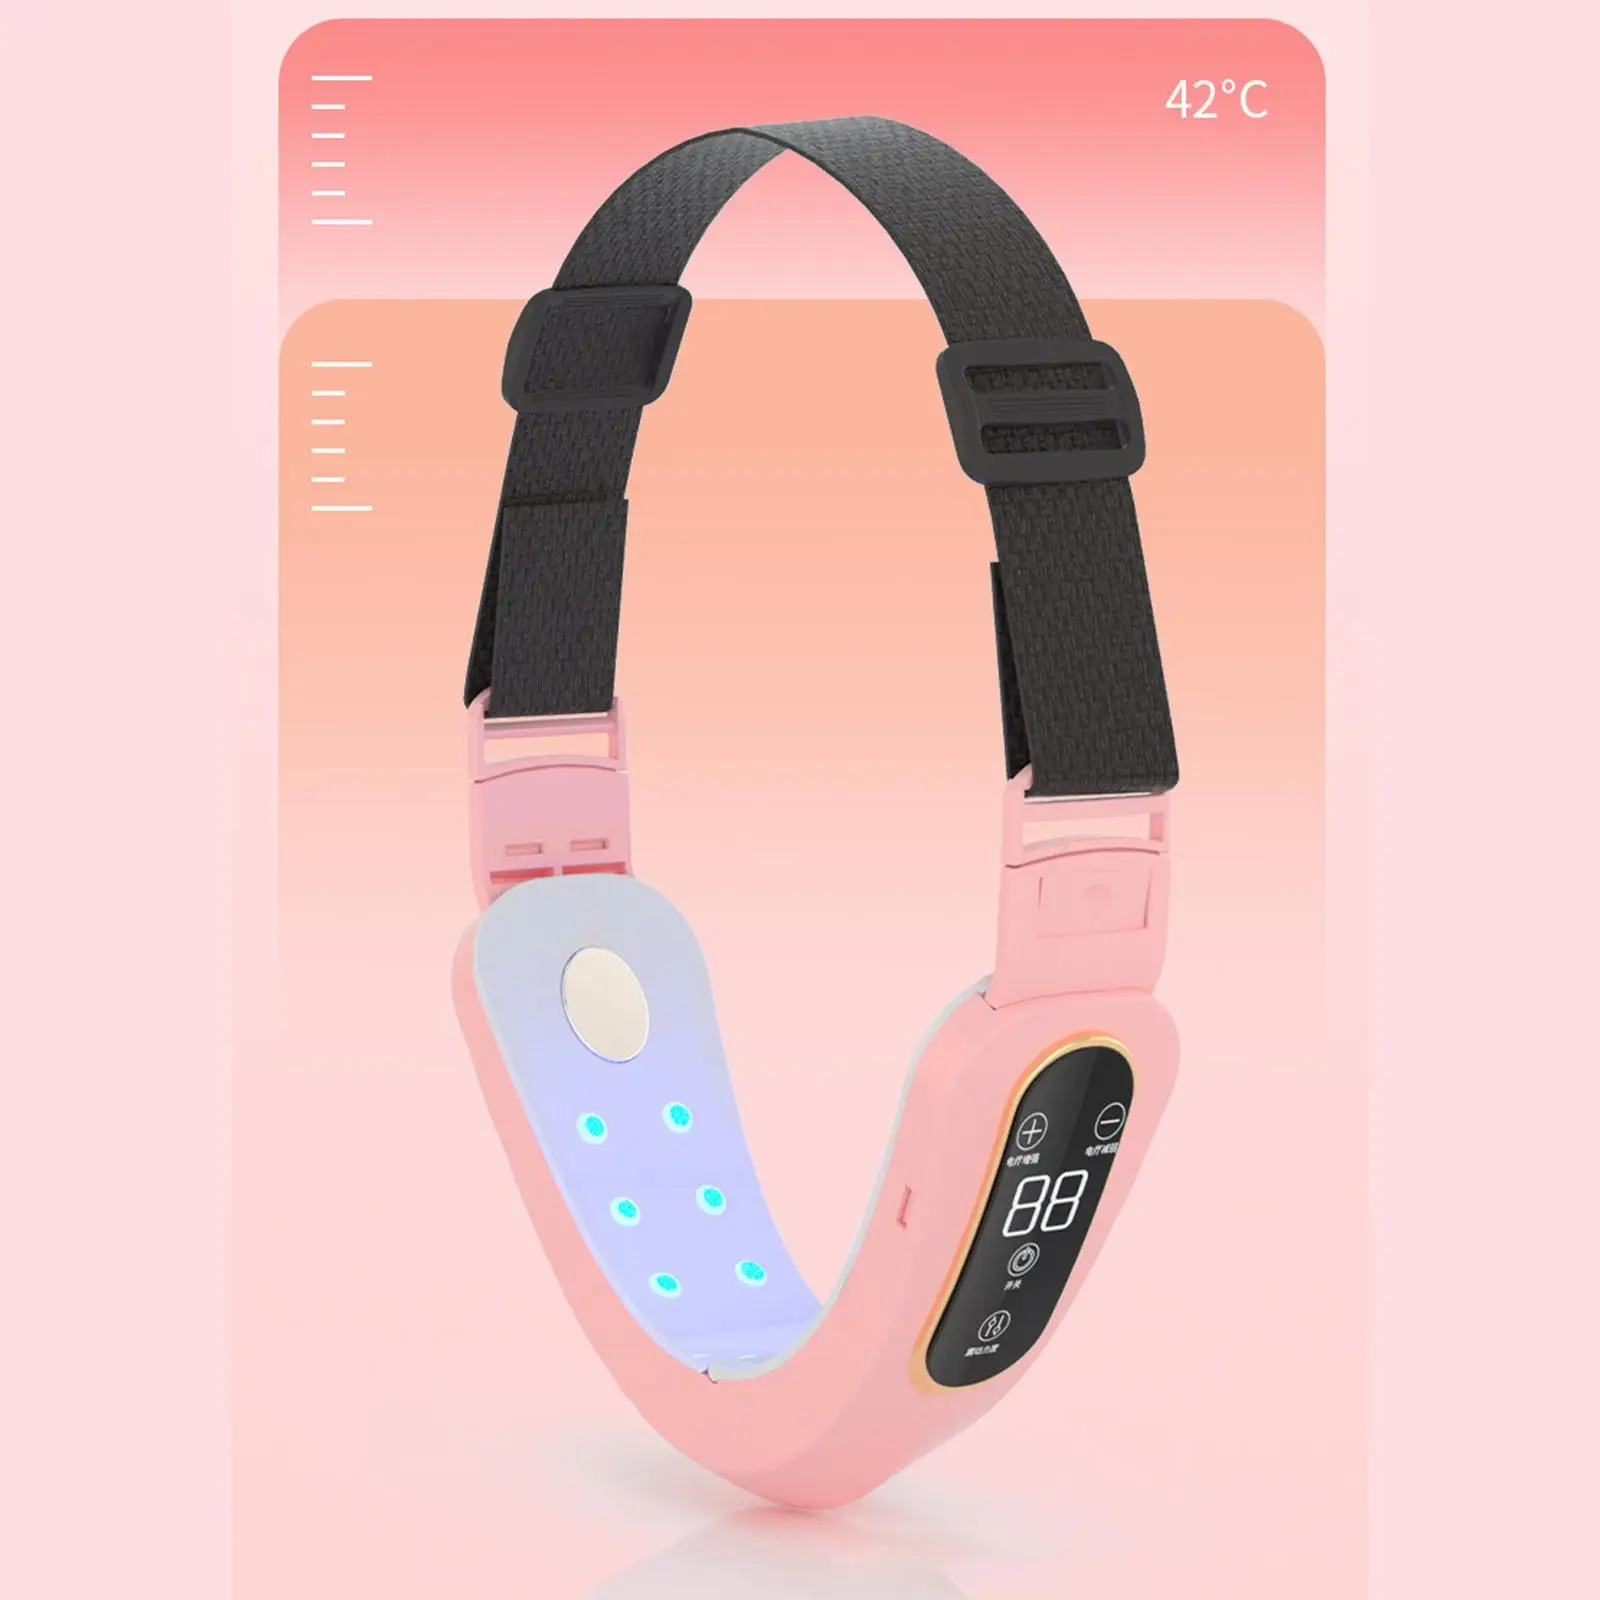 V Face Machine Beauty Device Painless Portable Electric Face Slimming Strap V Line up Lift Belt for Double Chin Removal Firming